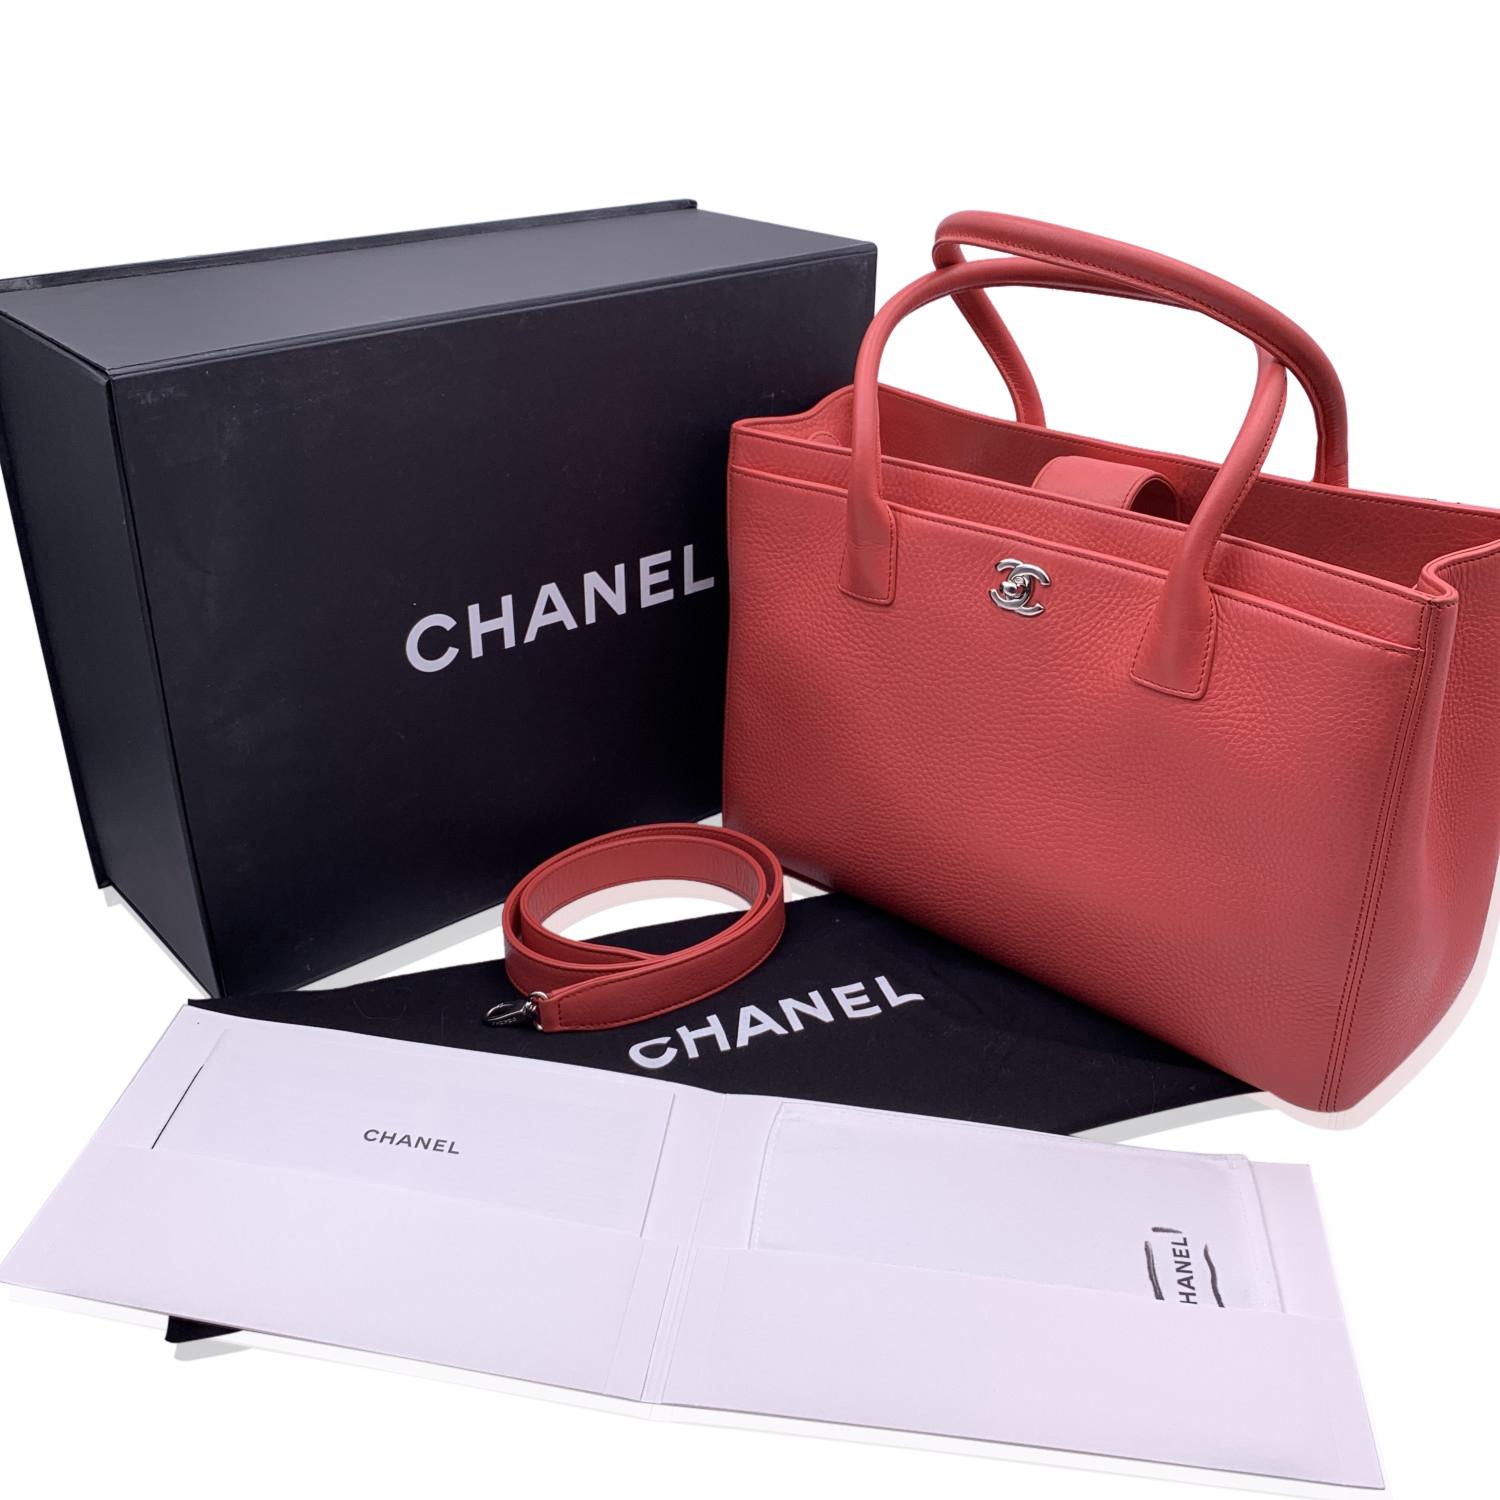 Chanel Executive Totes - 2 For Sale on 1stDibs  chanel executive tote  price, chanel neo executive tote, chanel executive cerf tote